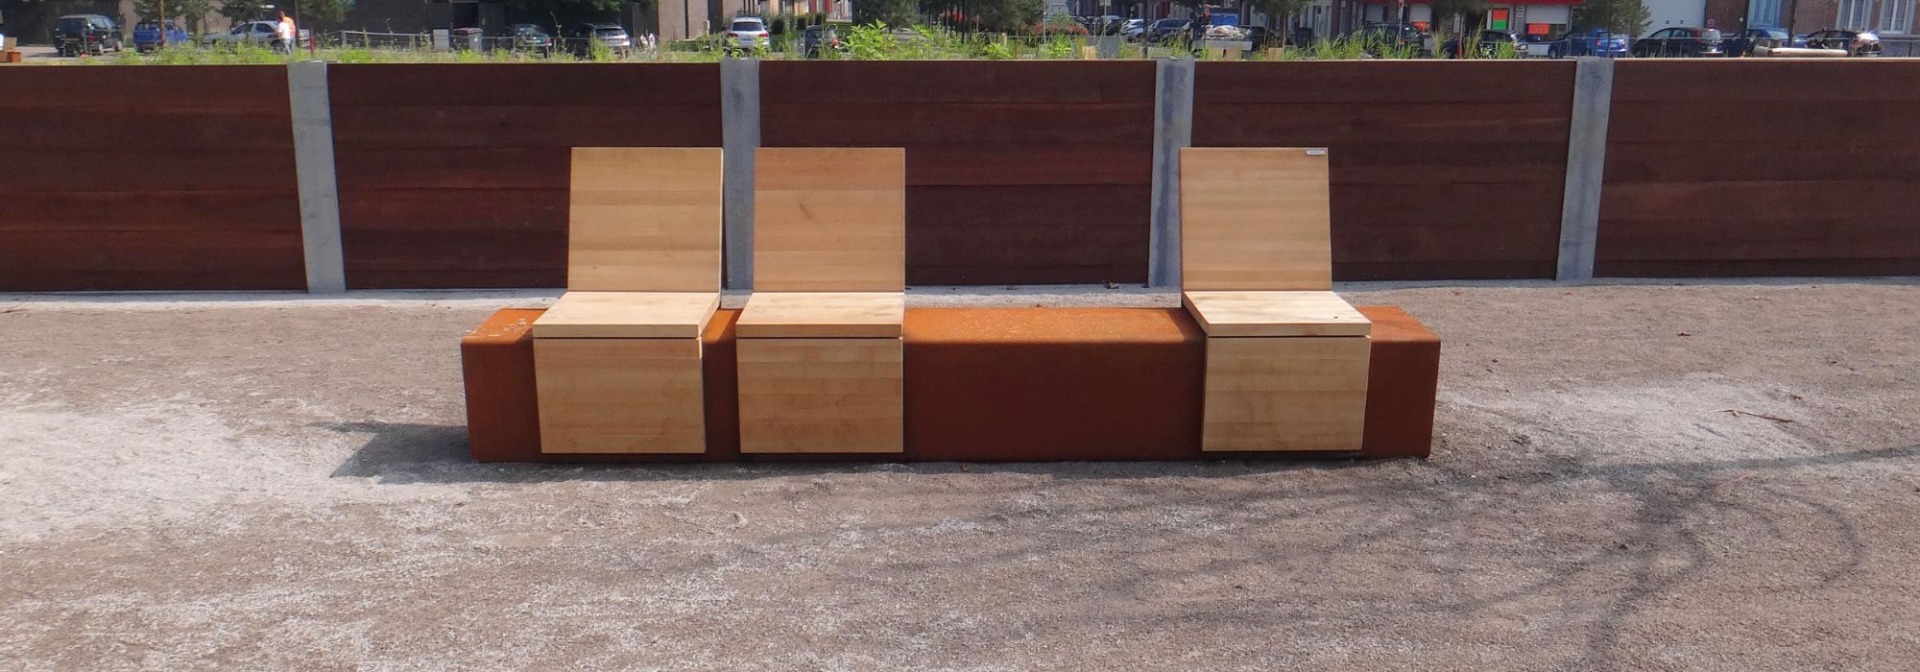 Cortomadere Bench